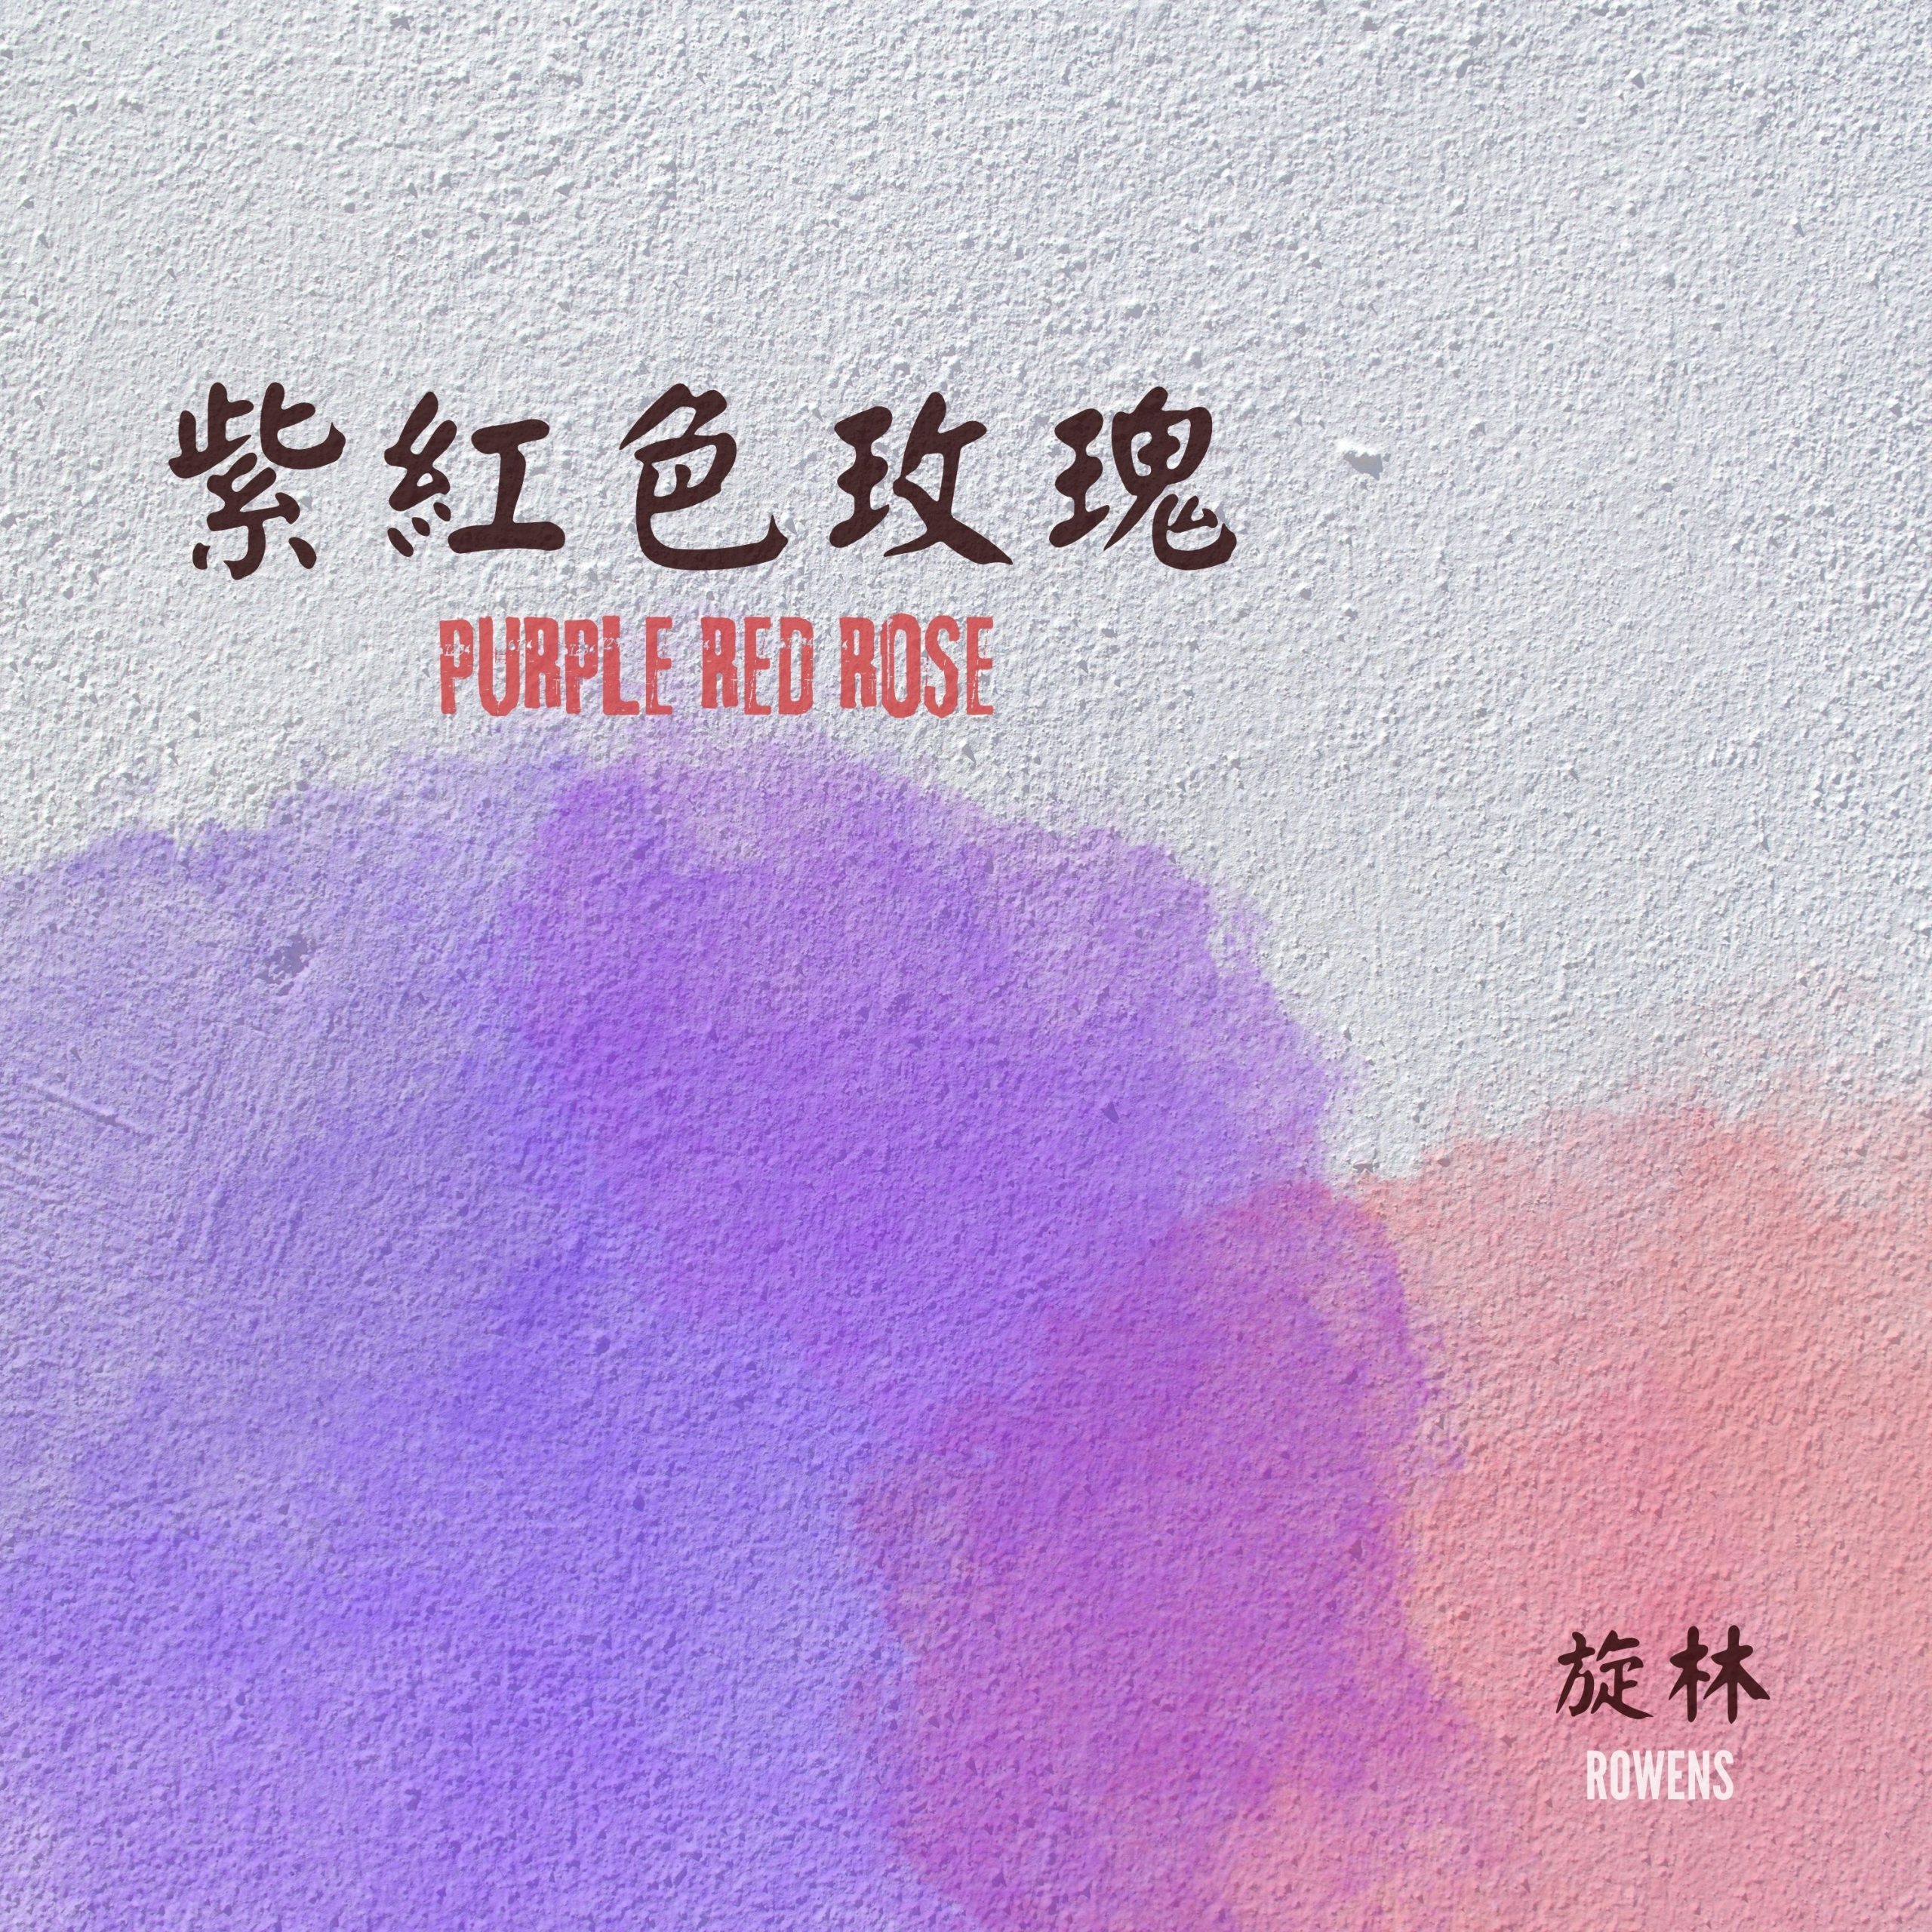 From Taipei to the World: Rowens’ ‘Purple Red Rose’ Echoes Love’s Resilience on the playlist